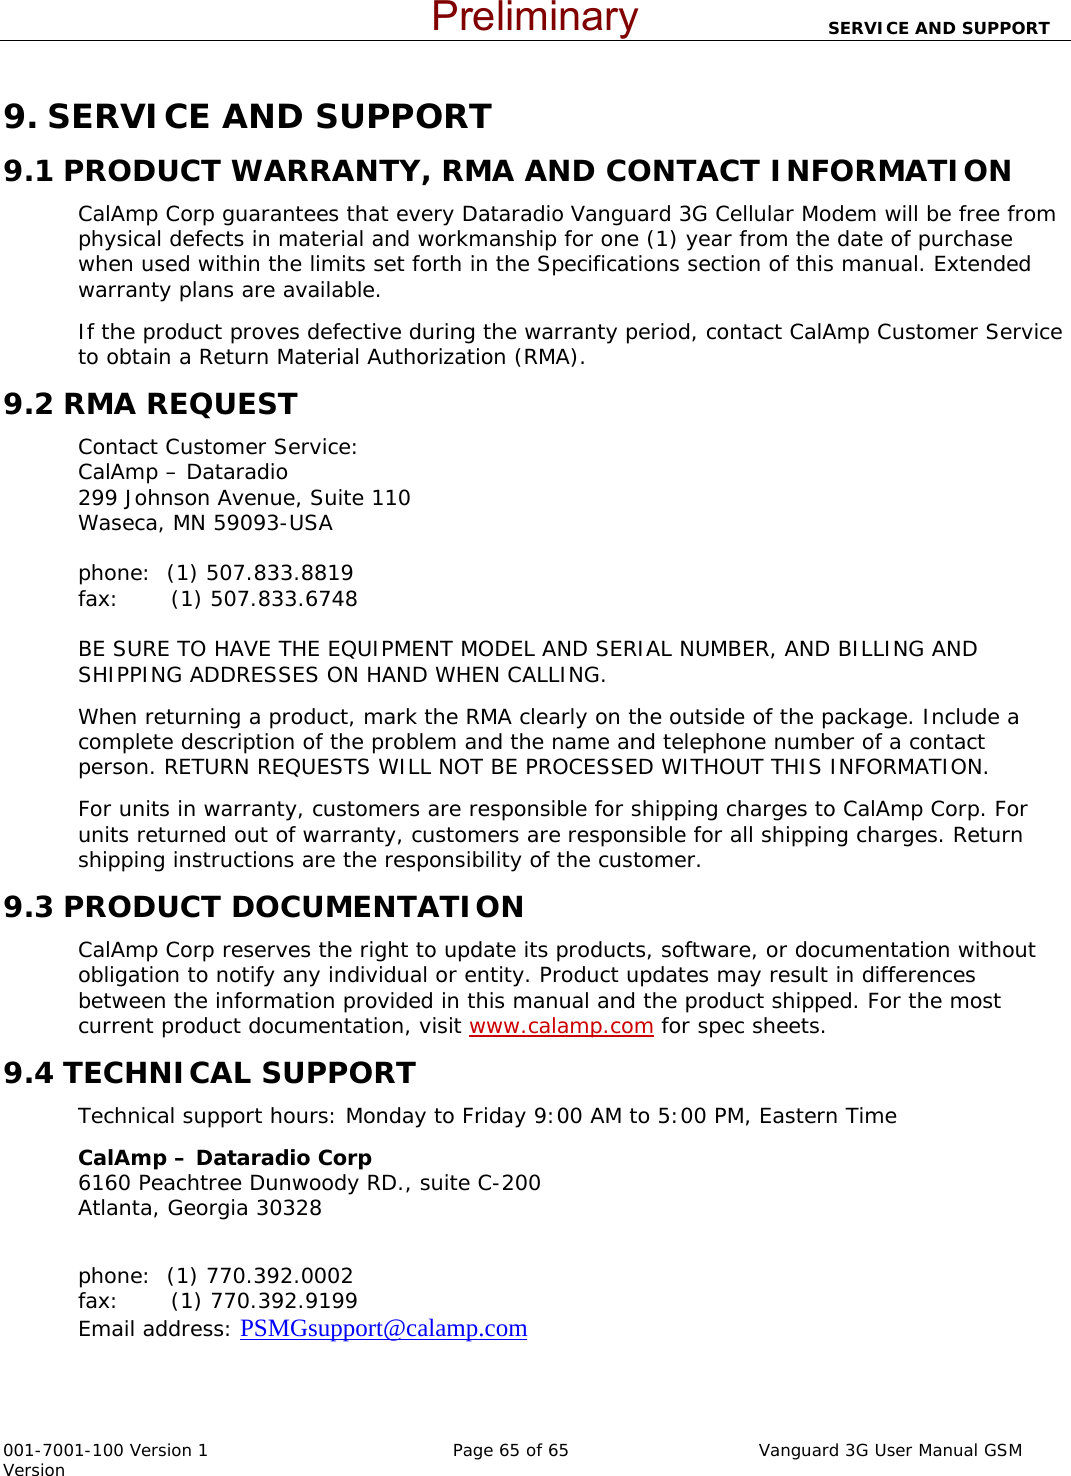                                SERVICE AND SUPPORT  001-7001-100 Version 1       Page 65 of 65       Vanguard 3G User Manual GSM Version 9. SERVICE AND SUPPORT 9.1 PRODUCT WARRANTY, RMA AND CONTACT INFORMATION CalAmp Corp guarantees that every Dataradio Vanguard 3G Cellular Modem will be free from physical defects in material and workmanship for one (1) year from the date of purchase when used within the limits set forth in the Specifications section of this manual. Extended warranty plans are available.  If the product proves defective during the warranty period, contact CalAmp Customer Service to obtain a Return Material Authorization (RMA).  9.2 RMA REQUEST Contact Customer Service: CalAmp – Dataradio  299 Johnson Avenue, Suite 110 Waseca, MN 59093-USA  phone:  (1) 507.833.8819                                                                                           fax:       (1) 507.833.6748                                                                                                     BE SURE TO HAVE THE EQUIPMENT MODEL AND SERIAL NUMBER, AND BILLING AND SHIPPING ADDRESSES ON HAND WHEN CALLING.  When returning a product, mark the RMA clearly on the outside of the package. Include a complete description of the problem and the name and telephone number of a contact person. RETURN REQUESTS WILL NOT BE PROCESSED WITHOUT THIS INFORMATION. For units in warranty, customers are responsible for shipping charges to CalAmp Corp. For units returned out of warranty, customers are responsible for all shipping charges. Return shipping instructions are the responsibility of the customer. 9.3 PRODUCT DOCUMENTATION CalAmp Corp reserves the right to update its products, software, or documentation without obligation to notify any individual or entity. Product updates may result in differences between the information provided in this manual and the product shipped. For the most current product documentation, visit www.calamp.com for spec sheets. 9.4 TECHNICAL SUPPORT Technical support hours: Monday to Friday 9:00 AM to 5:00 PM, Eastern Time CalAmp – Dataradio Corp                                                                                             6160 Peachtree Dunwoody RD., suite C-200                                                                           Atlanta, Georgia 30328                                                                                                                                      phone:  (1) 770.392.0002                                                                                            fax:       (1) 770.392.9199                                                                                                   Email address: PSMGsupport@calamp.com      Preliminary